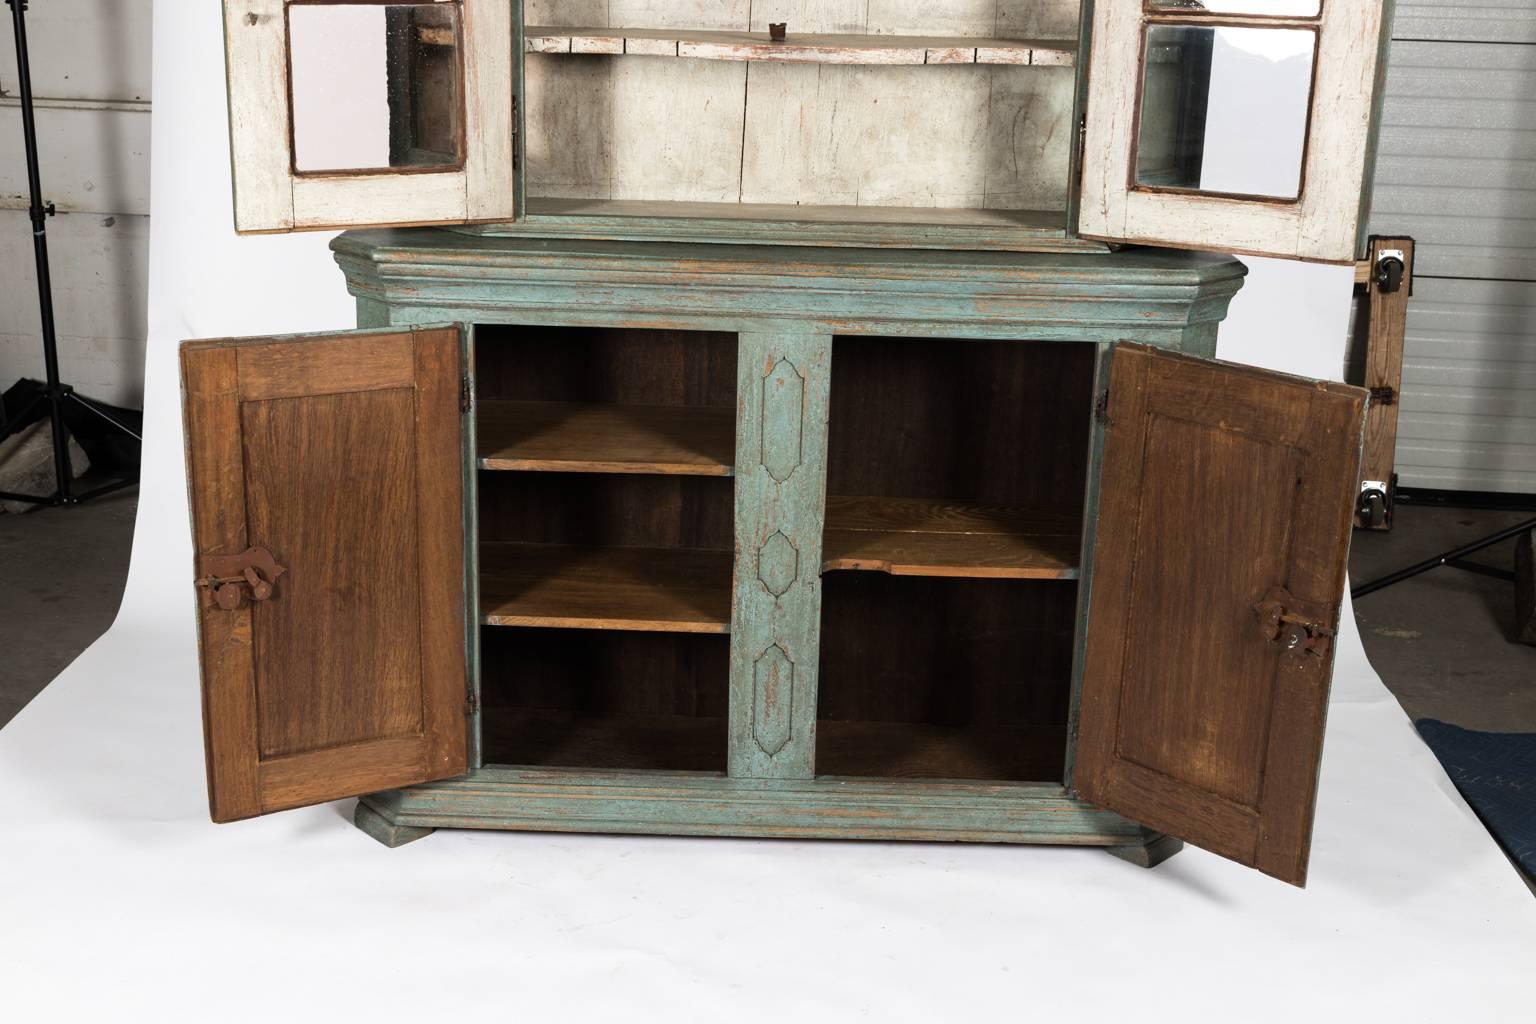 Blue painted oak display cabinet with glass fronted doors and sides, circa early 20th century. The lower part features two doors and geometric molding in an antiqued finish.
 